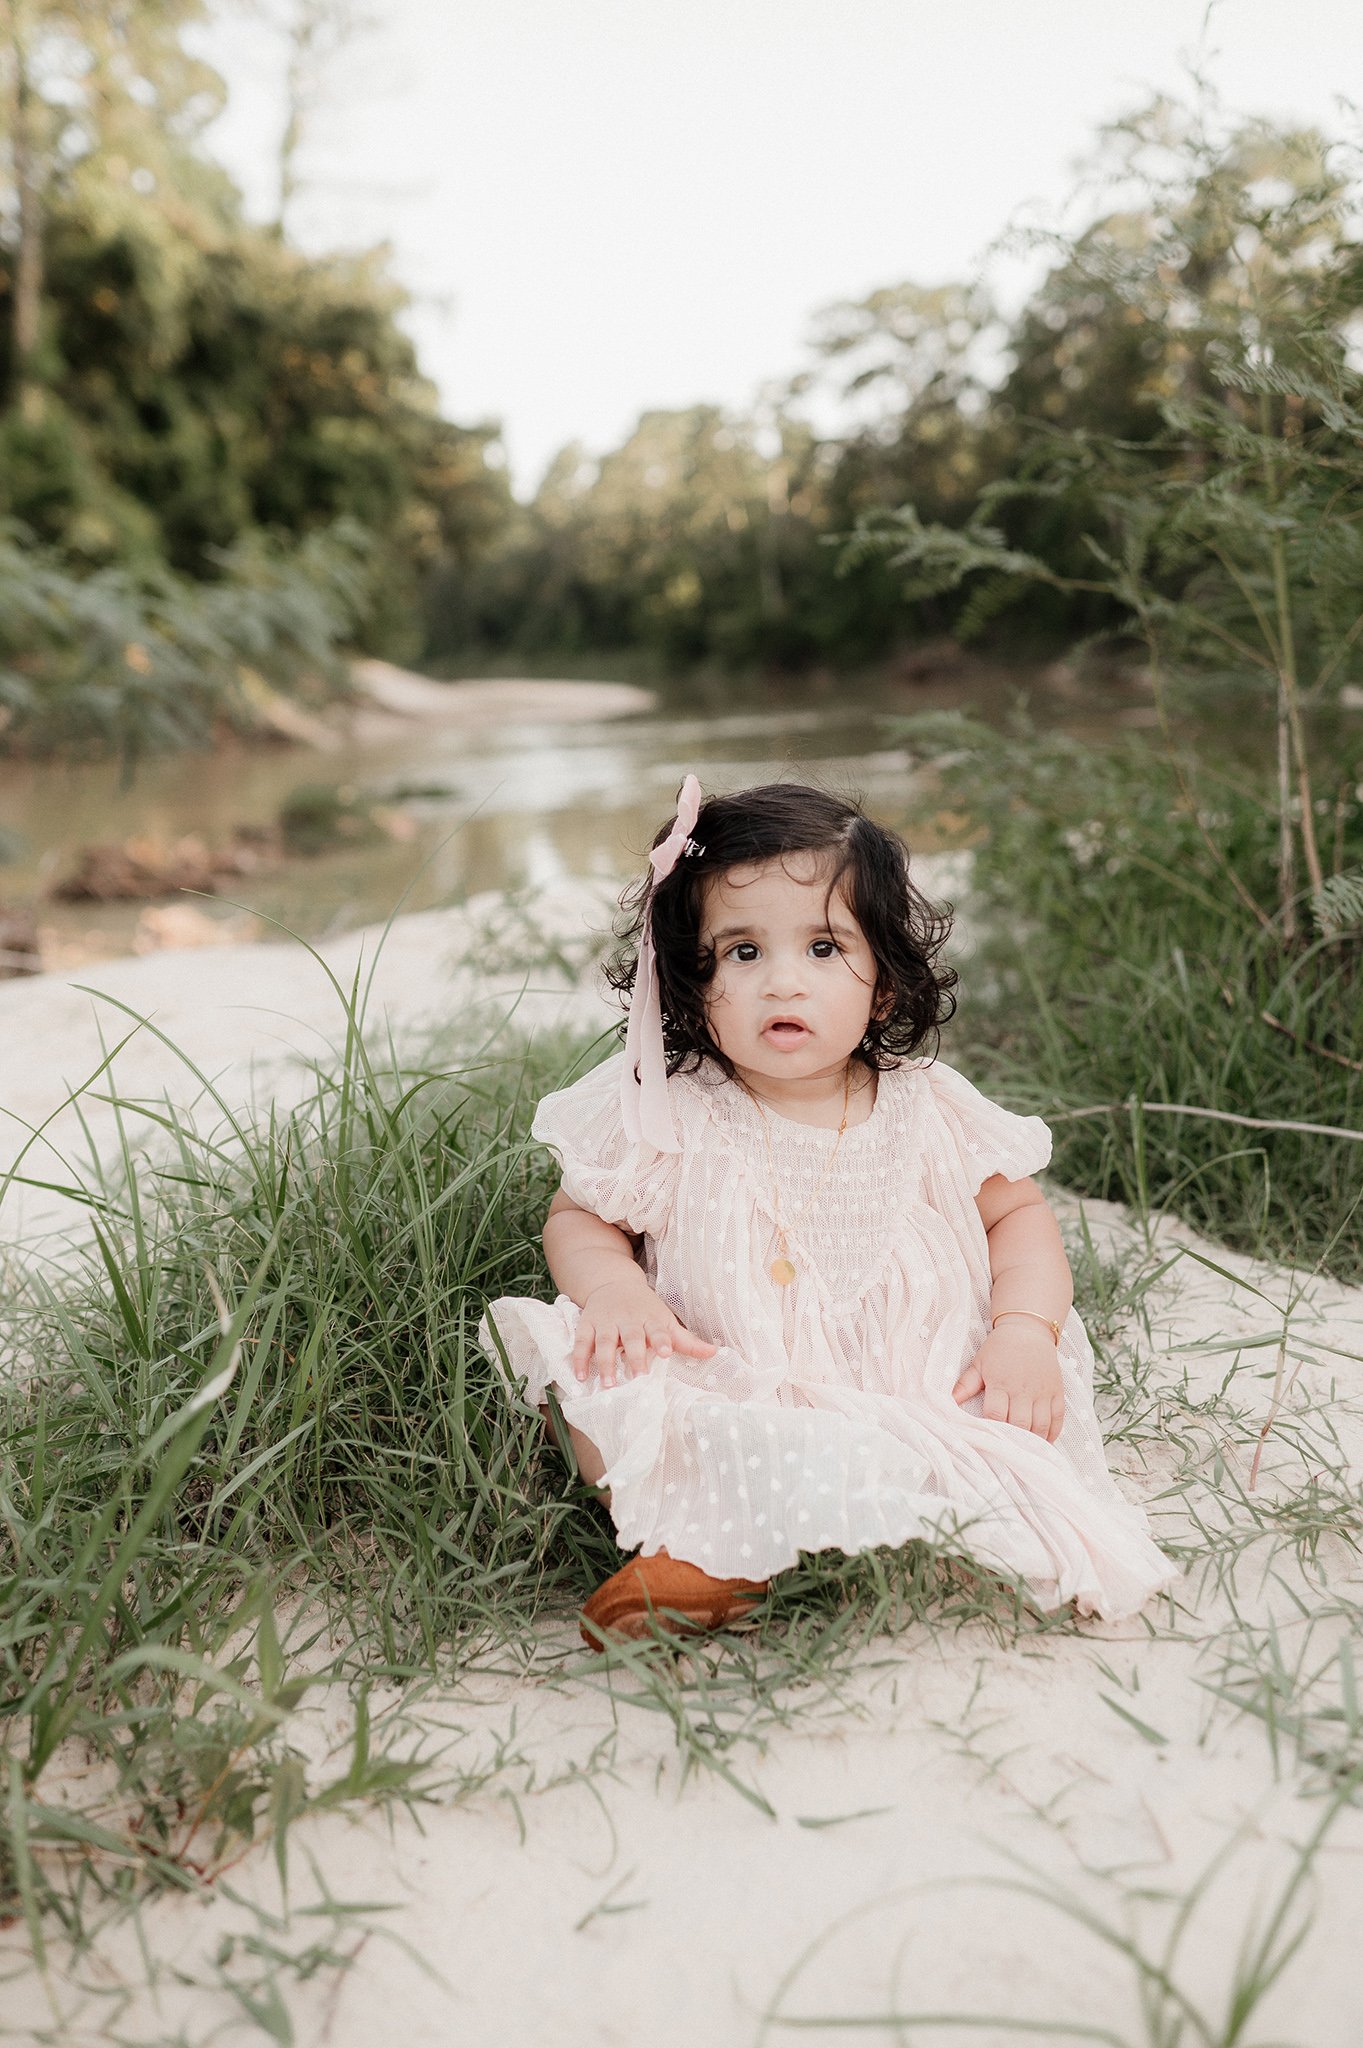 the woodlands family photographer _ conroe photographer _ houston family photographer _ ashley gillen photography _ texas family photographer _ conroe wedding photographer _ conroe texas _ cshi25.jpg